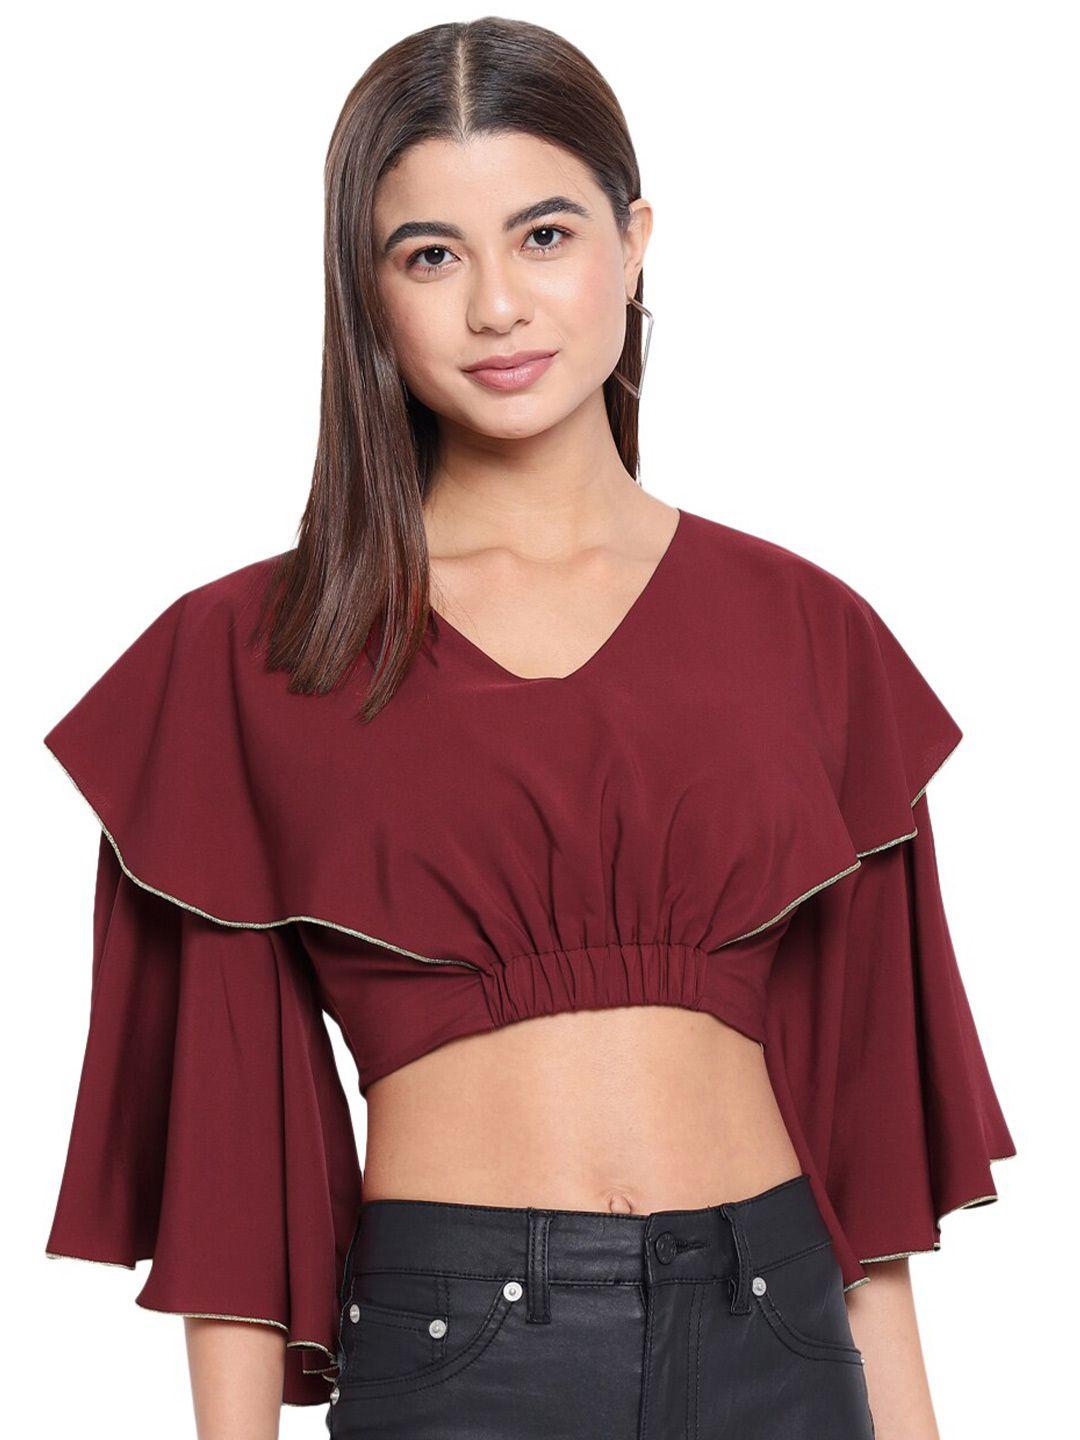 baesd v-neck flared sleeves crop top